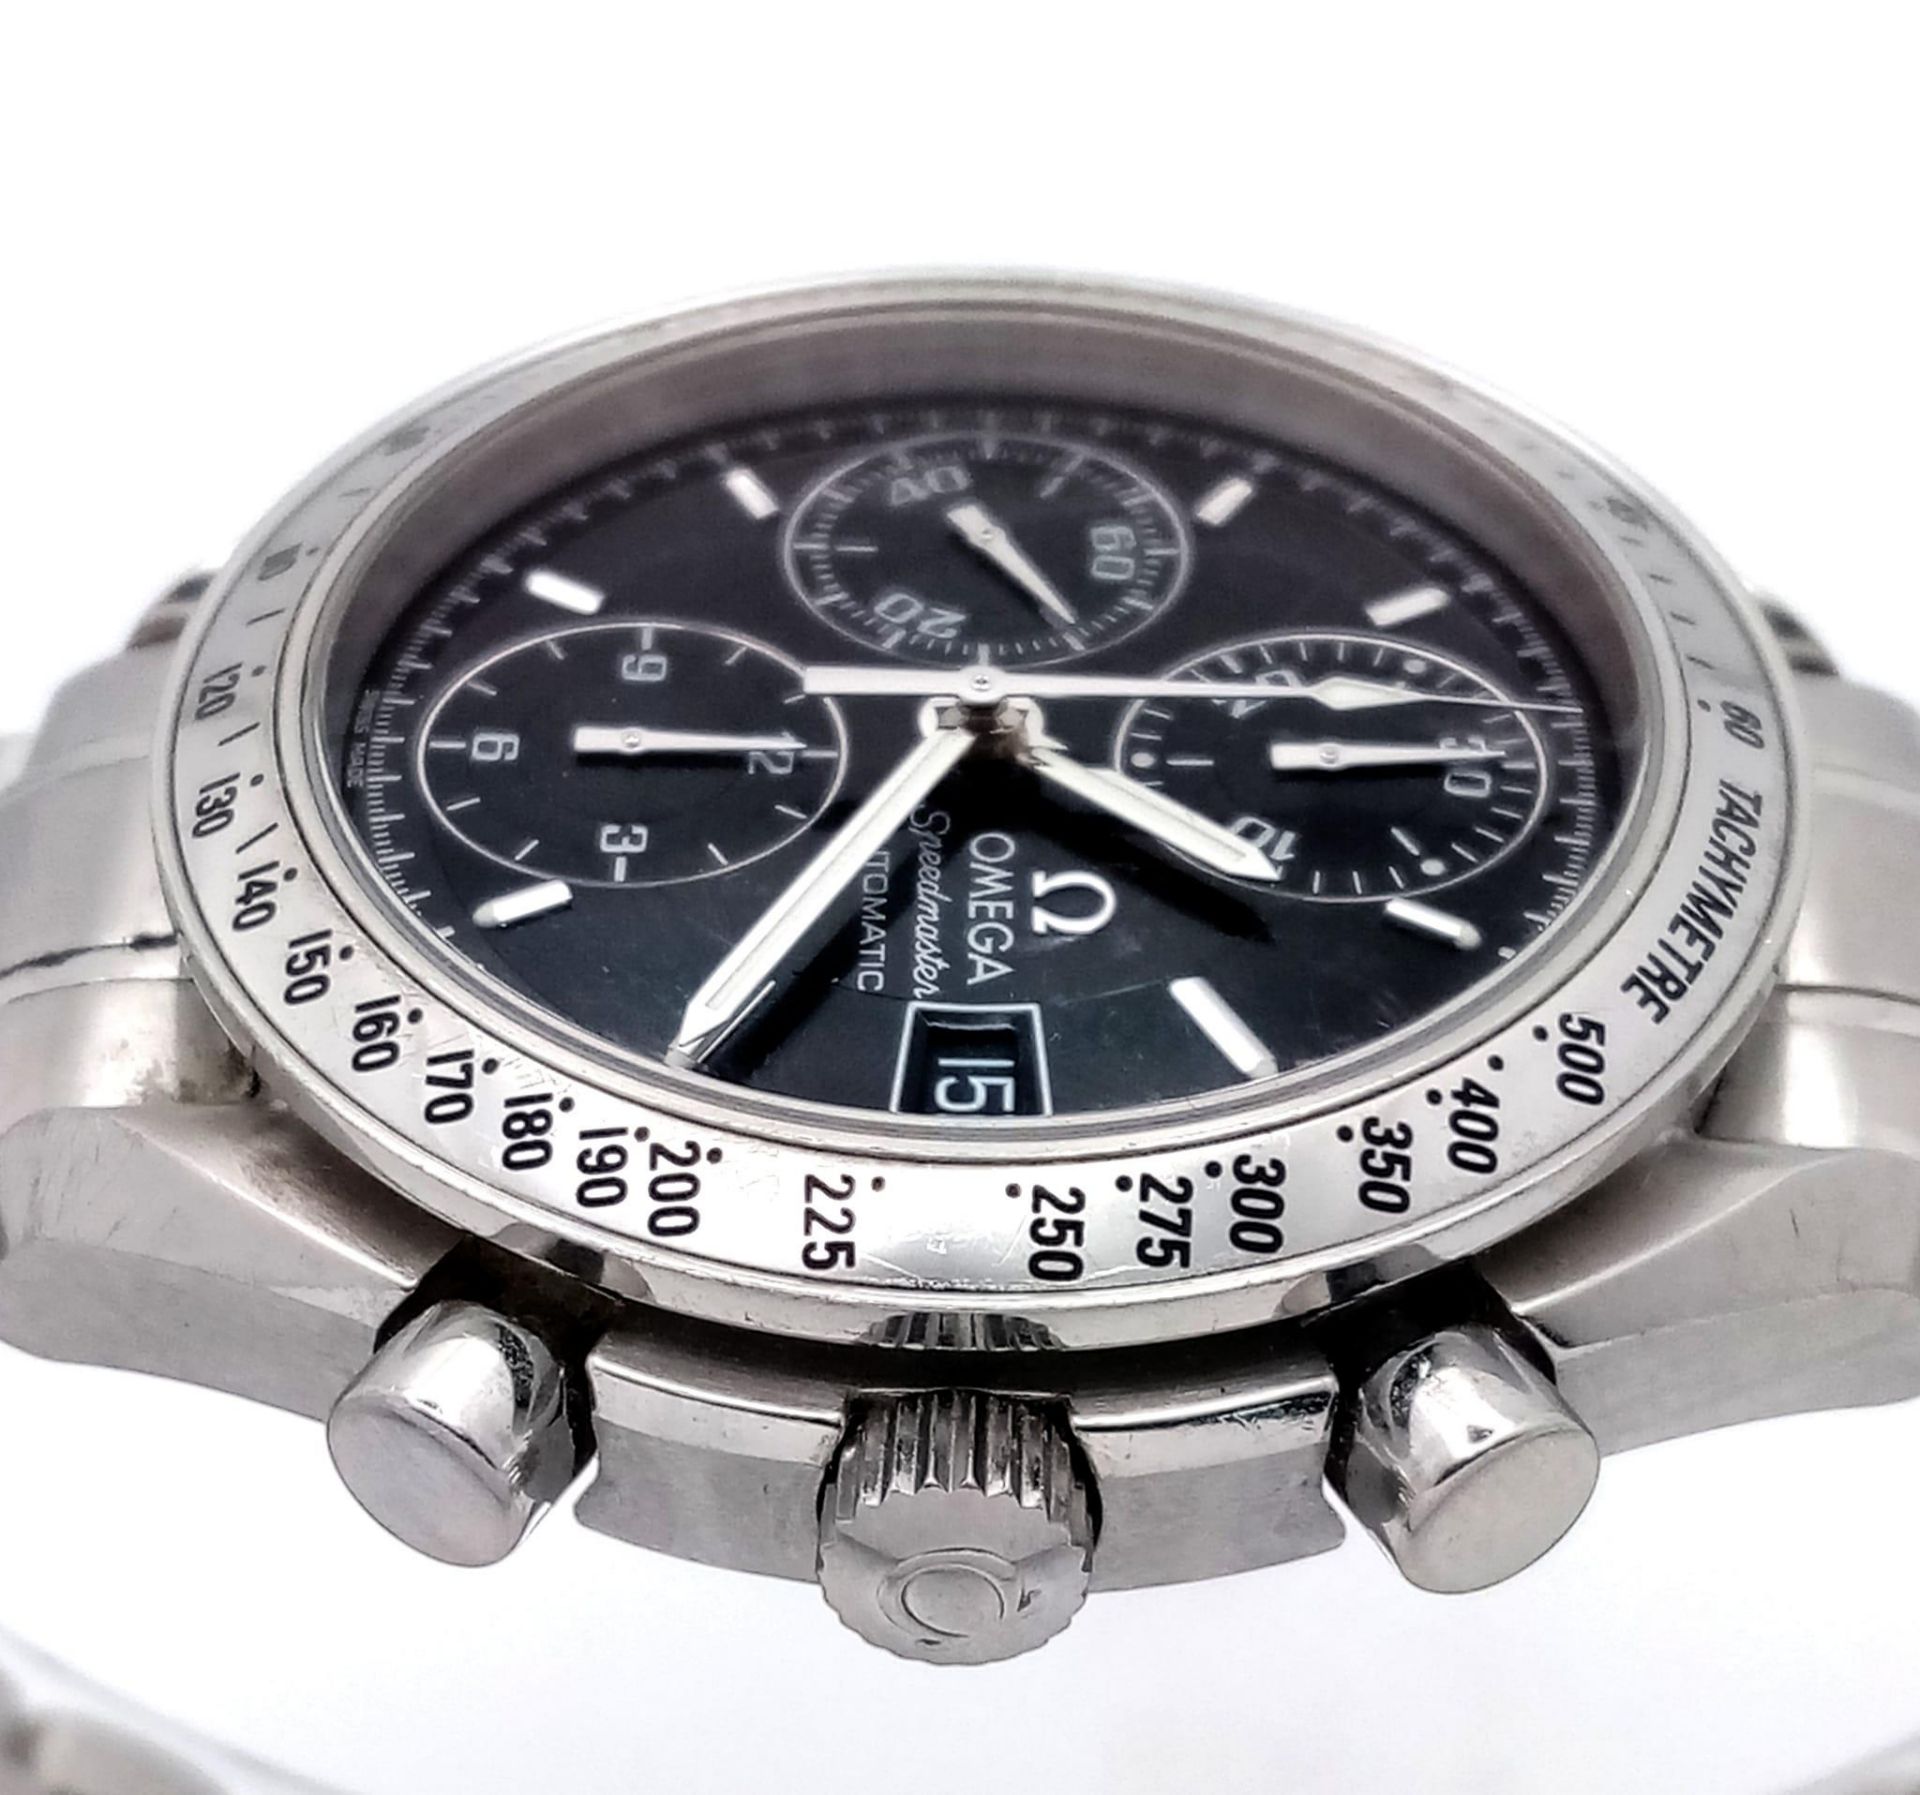 AN OMEGA "SPEEDMASTER" AUTOMATIC WATCH WITH 3 SUBDIALS , DATE BOX AND BLACK DIAL ALL SET IN - Image 5 of 9